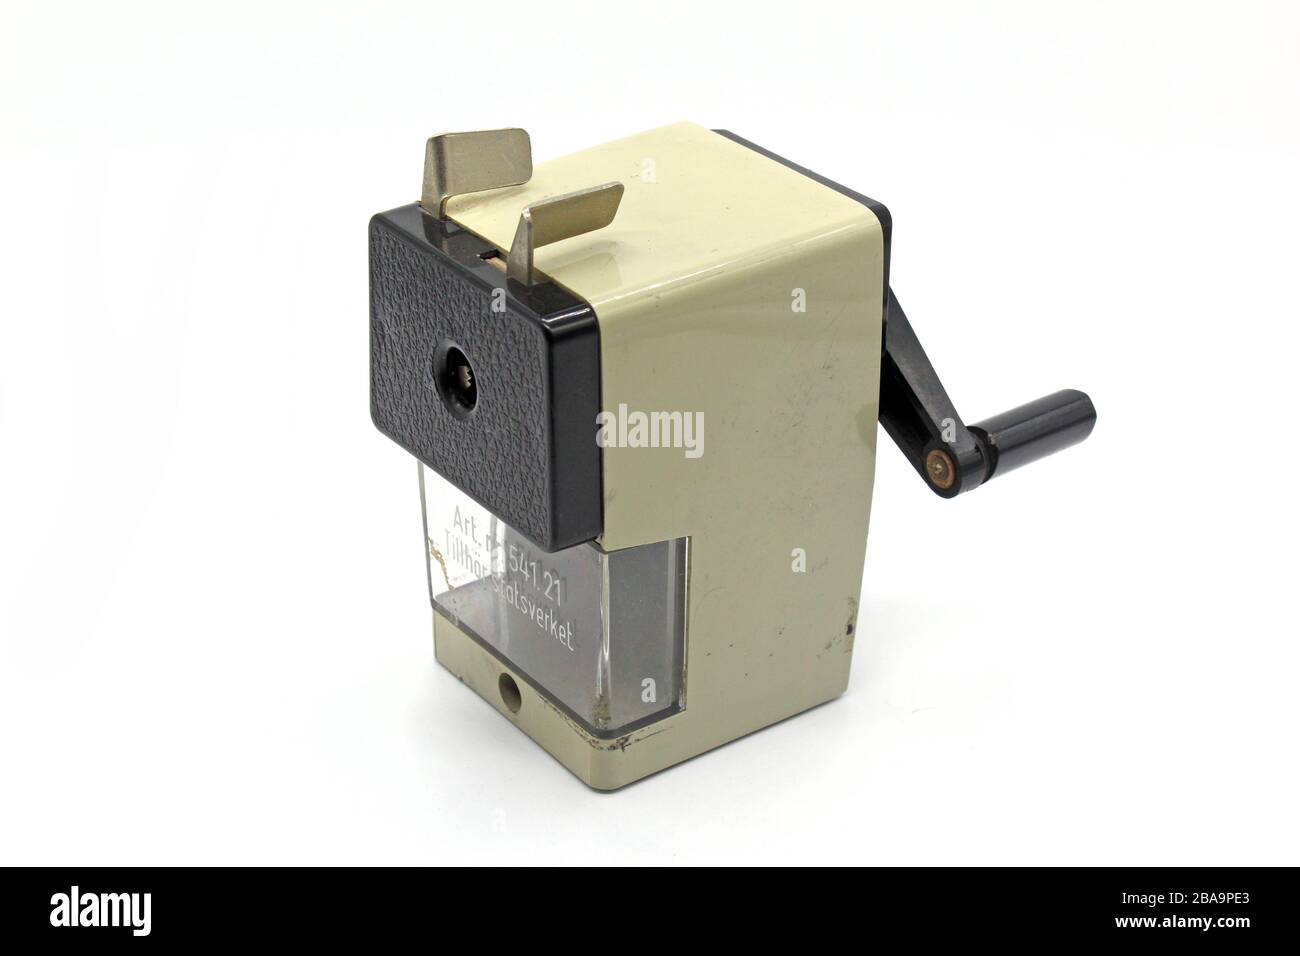 Vintage plastic pencil sharpener, isolated on white background, close-up Stock Photo